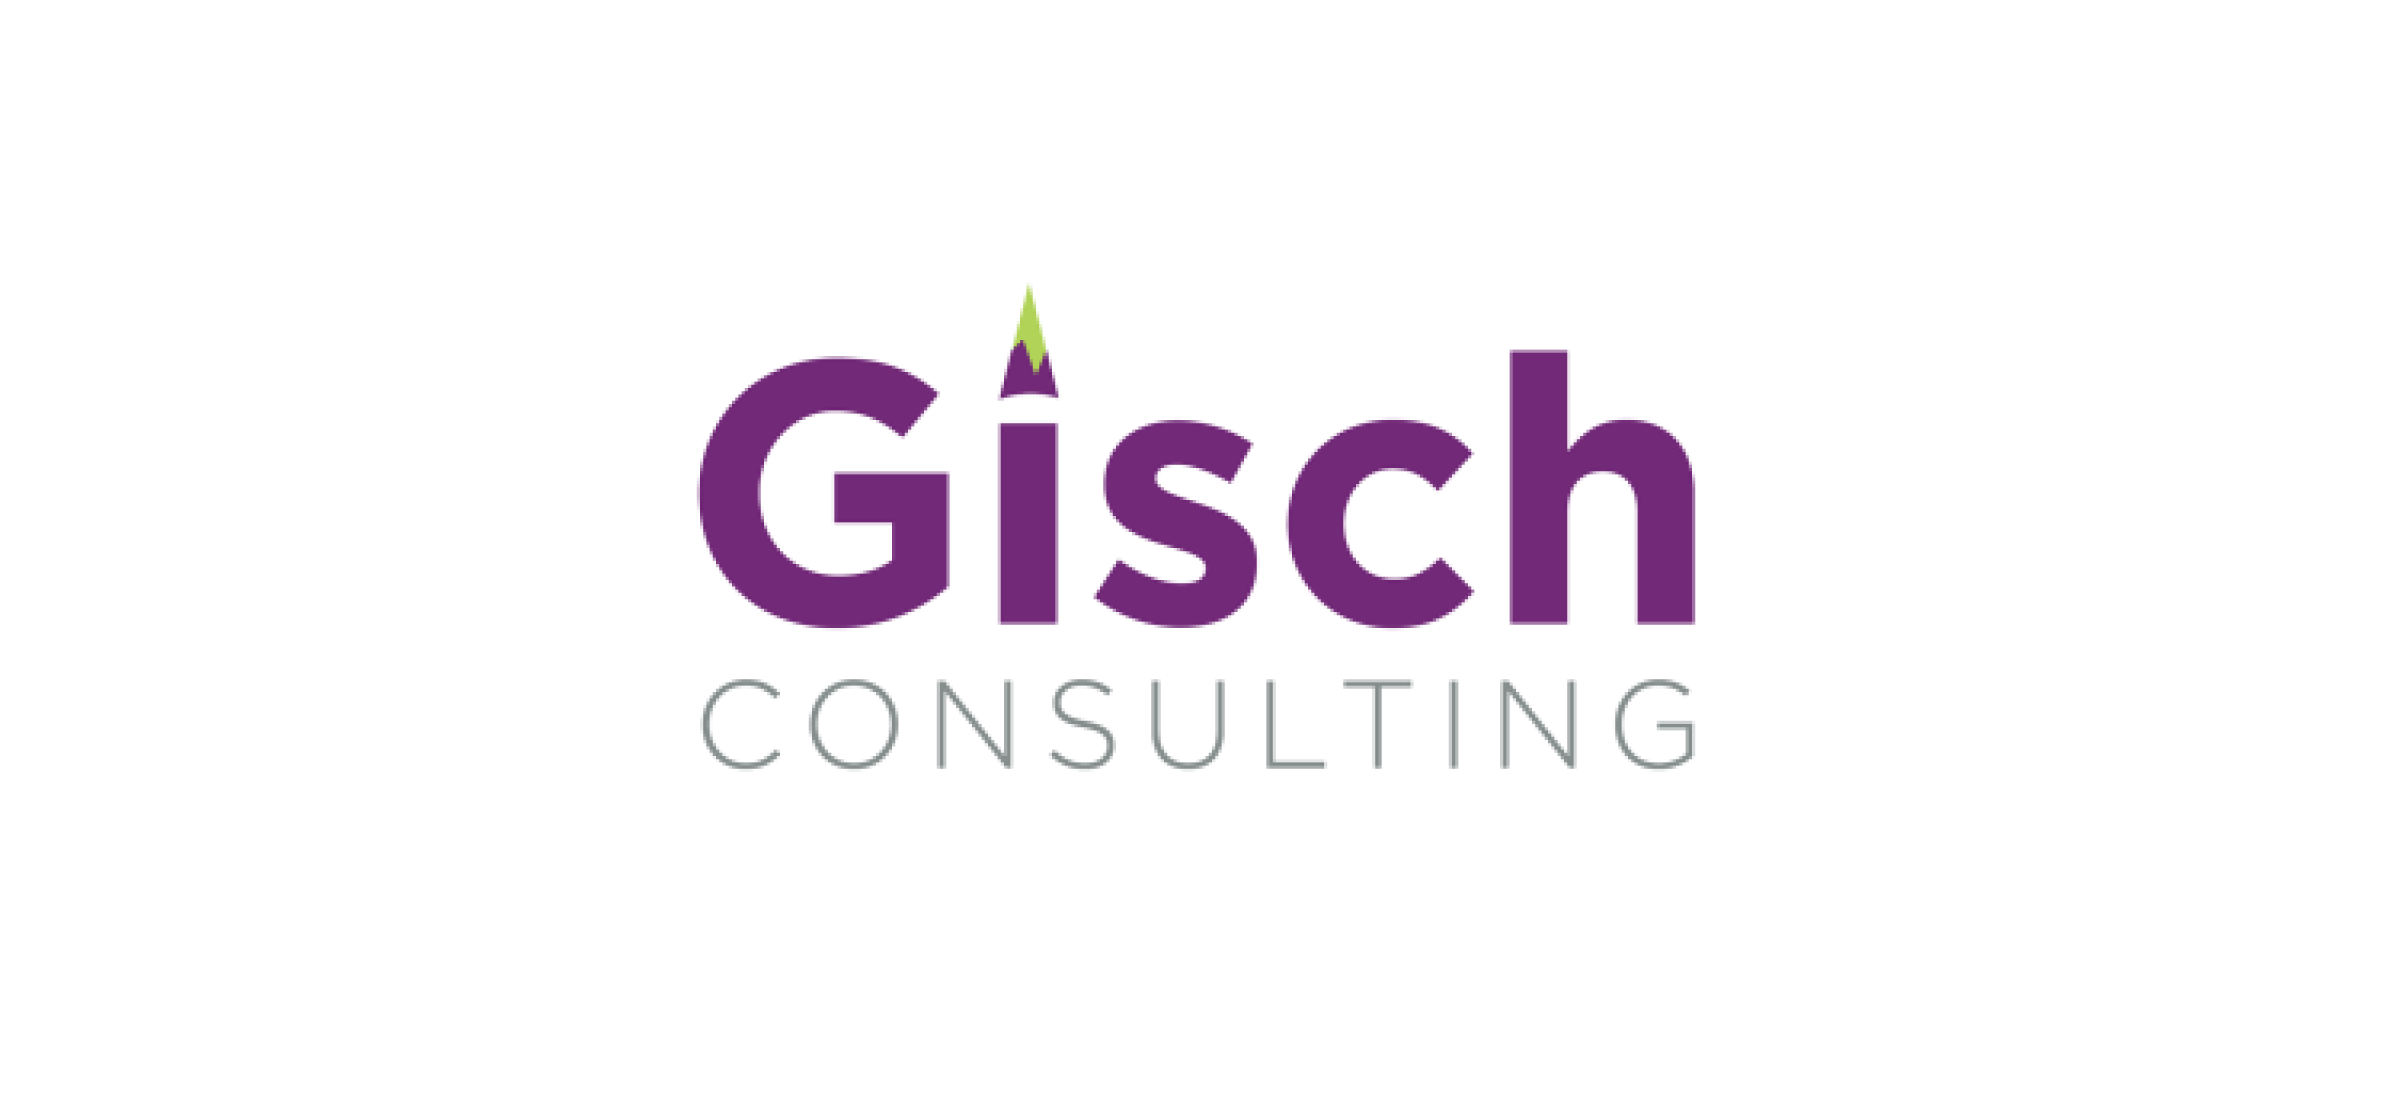 The Gisch Consulting logo